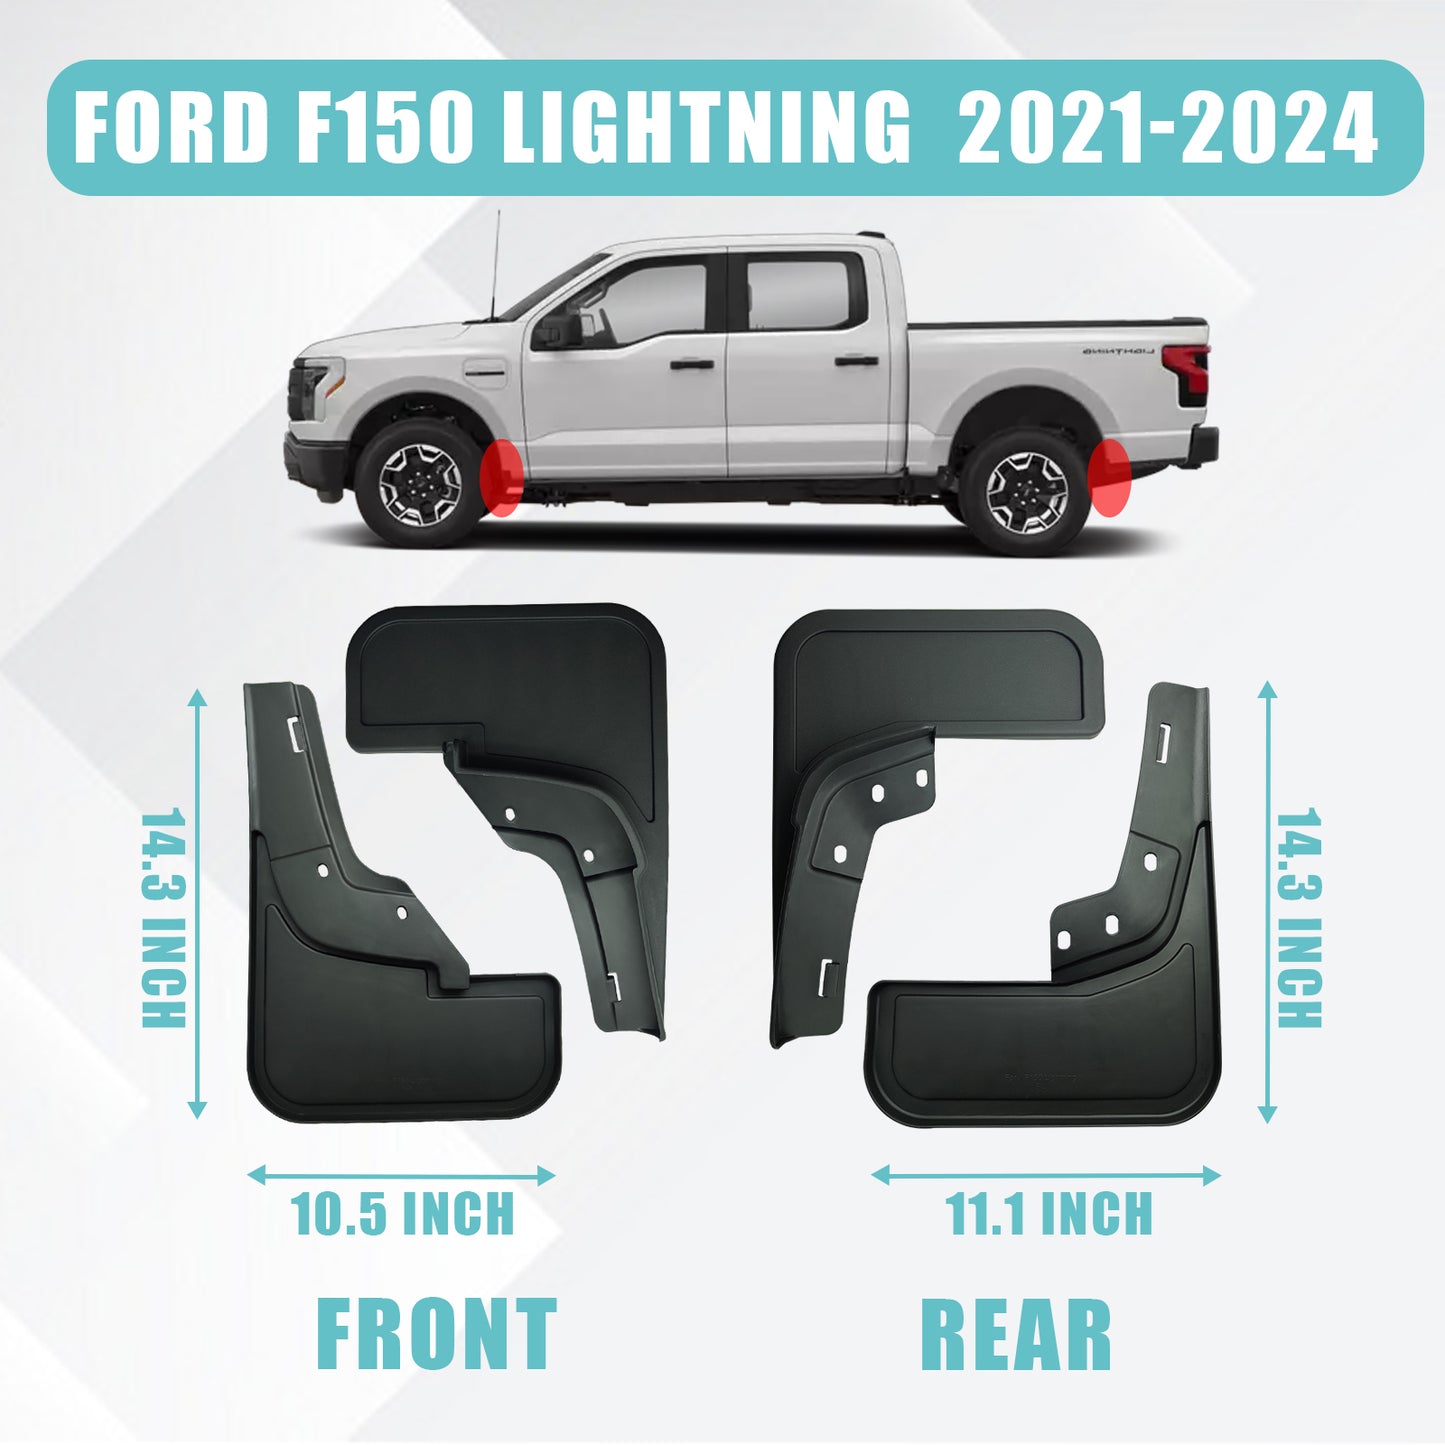 F-150 Lightning Mud Flaps Splash Guards (Set of 4) No Need to Drill Holes from BestEvMod